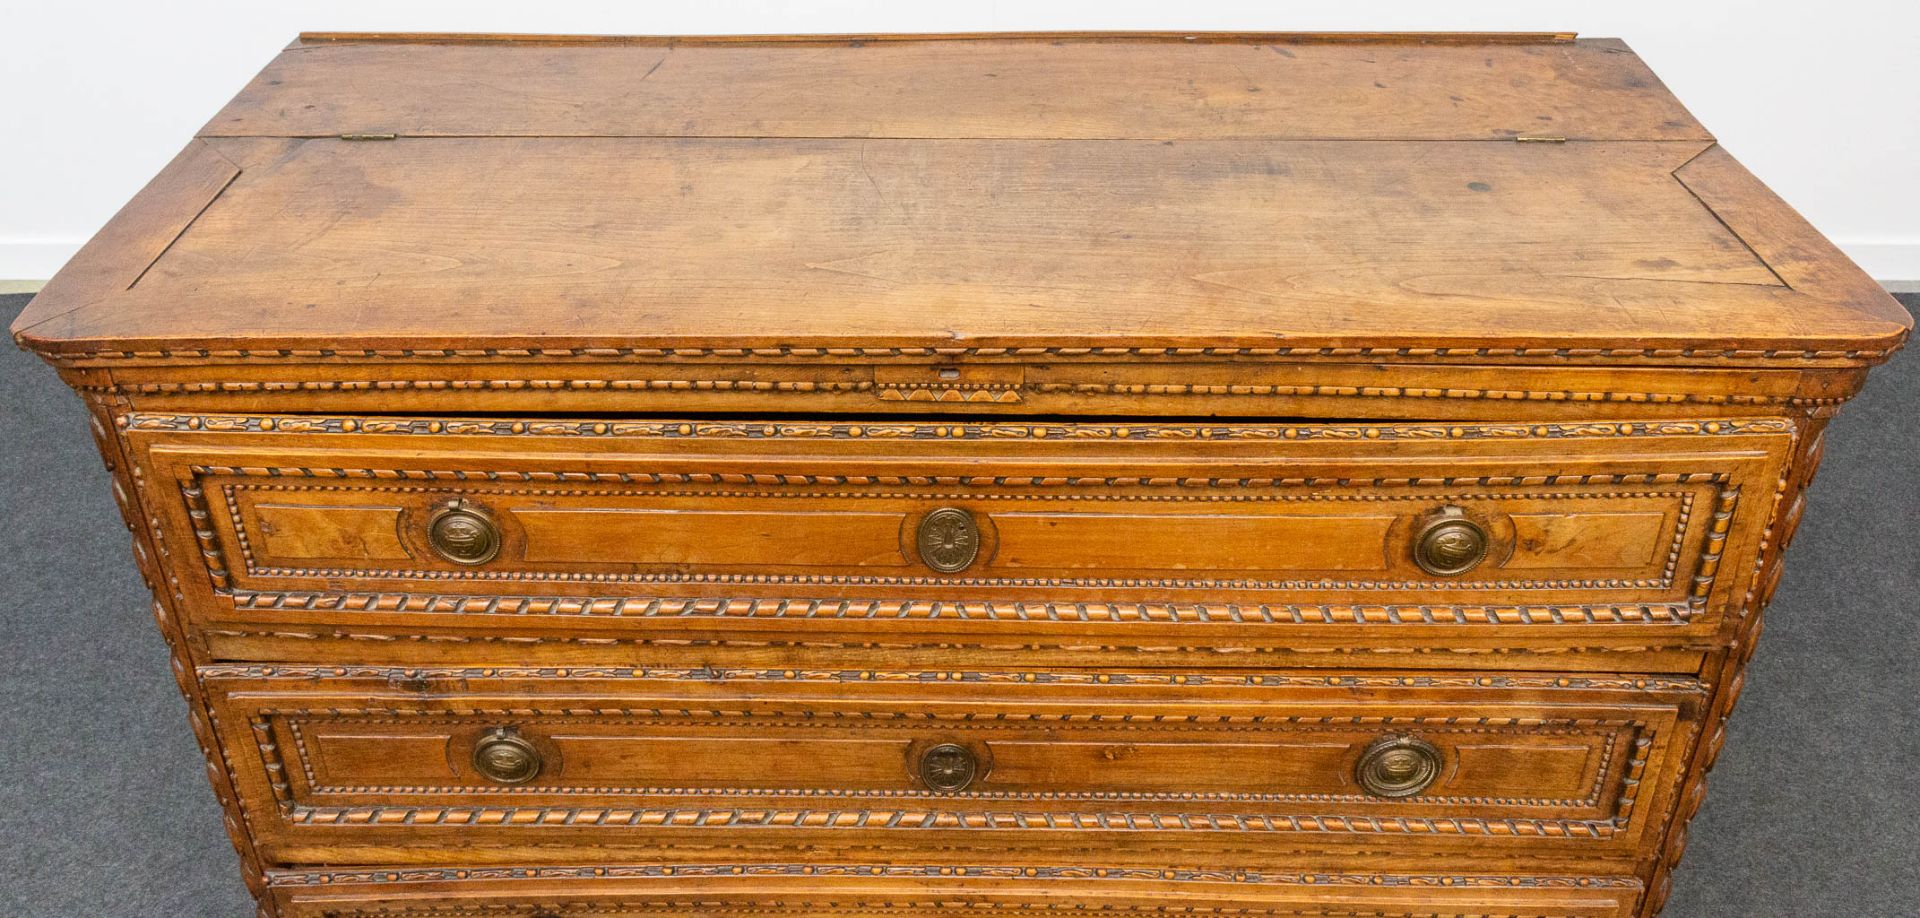 A wood sculptured commode in Louis XVI style, with 3 drawers and a hidden desk. 18th century. - Bild 21 aus 23